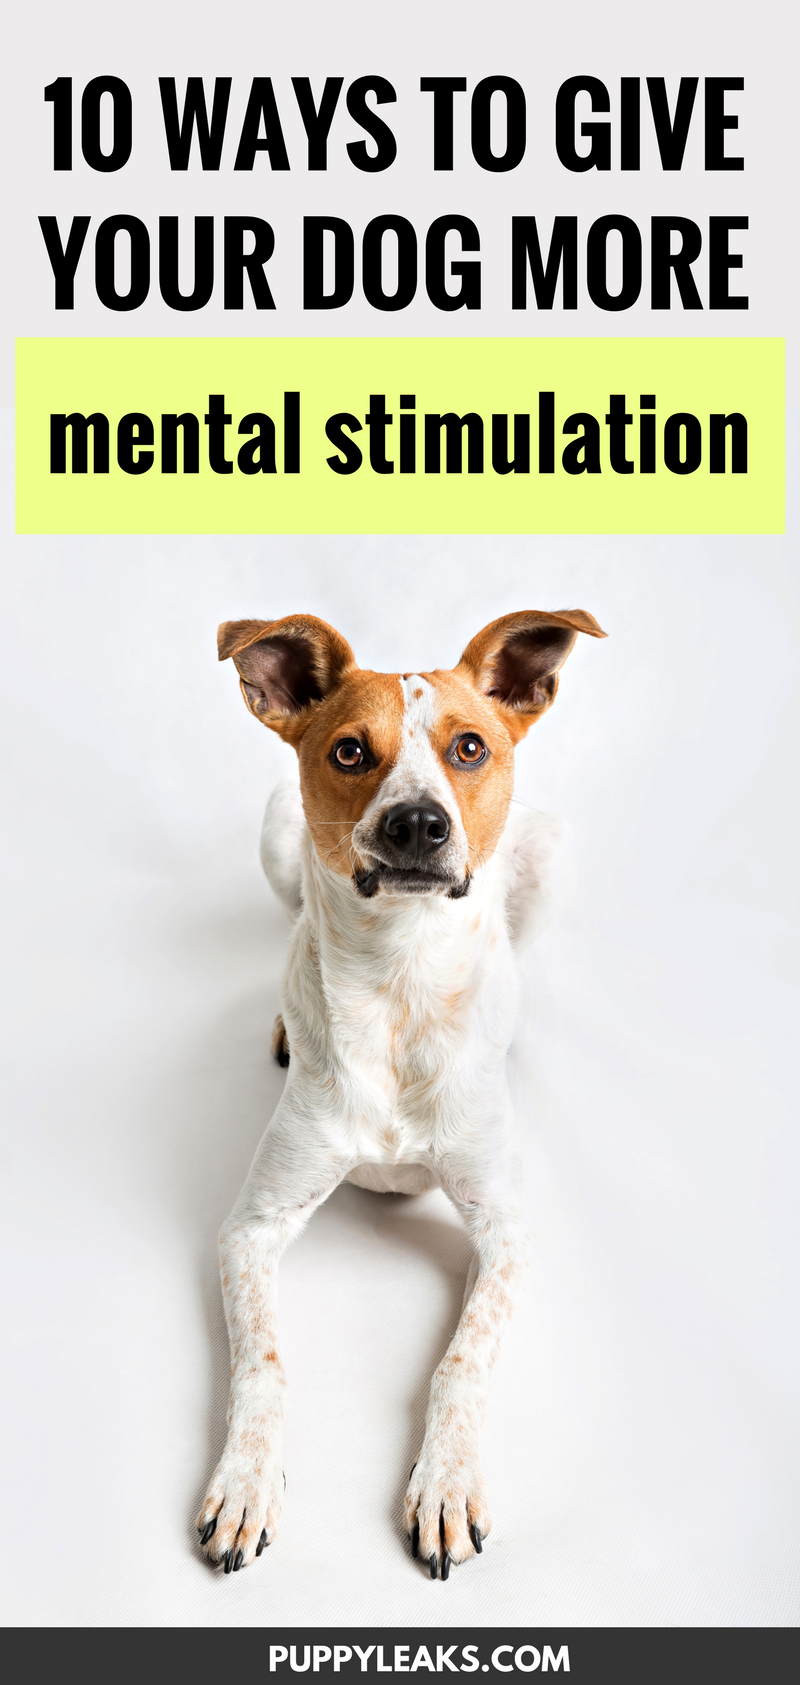 10 Ways to Give Your Dog More Mental Stimulation - Puppy Leaks